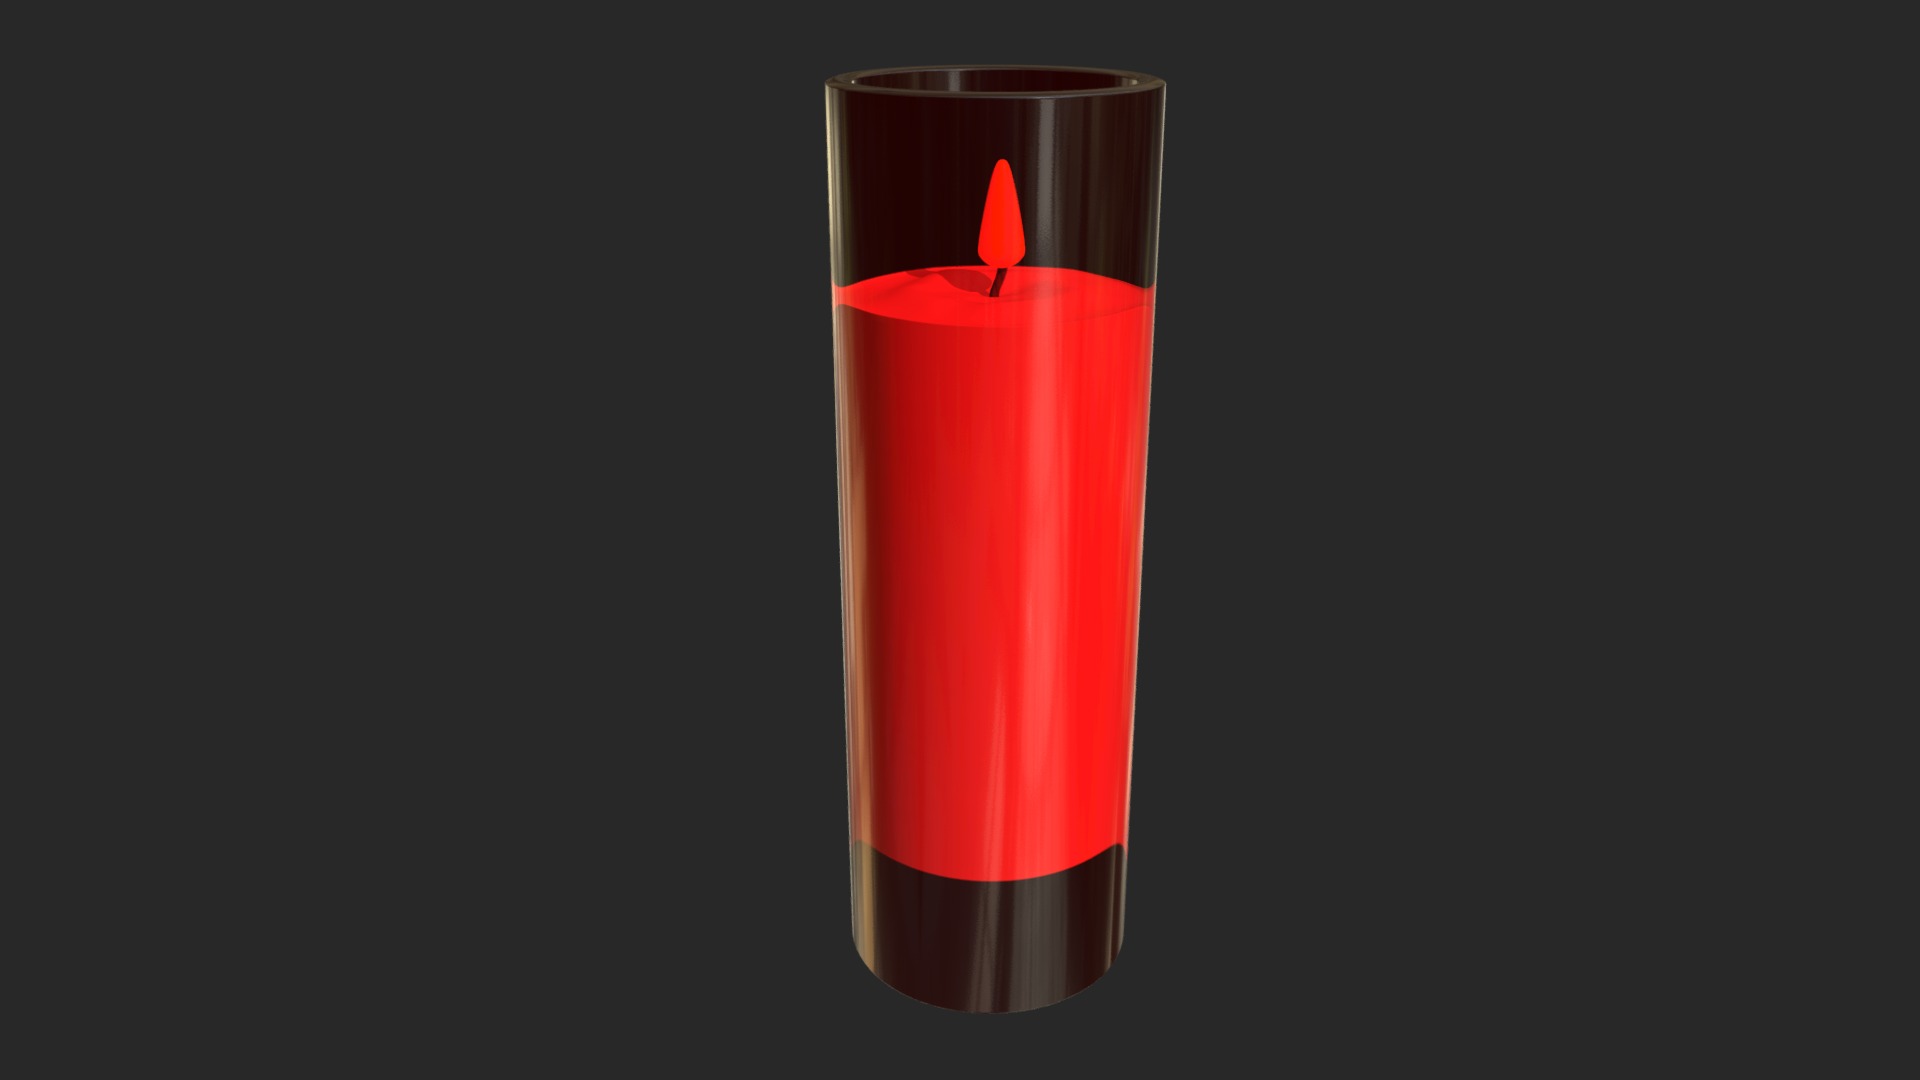 3D model Votive candle - This is a 3D model of the Votive candle. The 3D model is about a red candle with a flame.